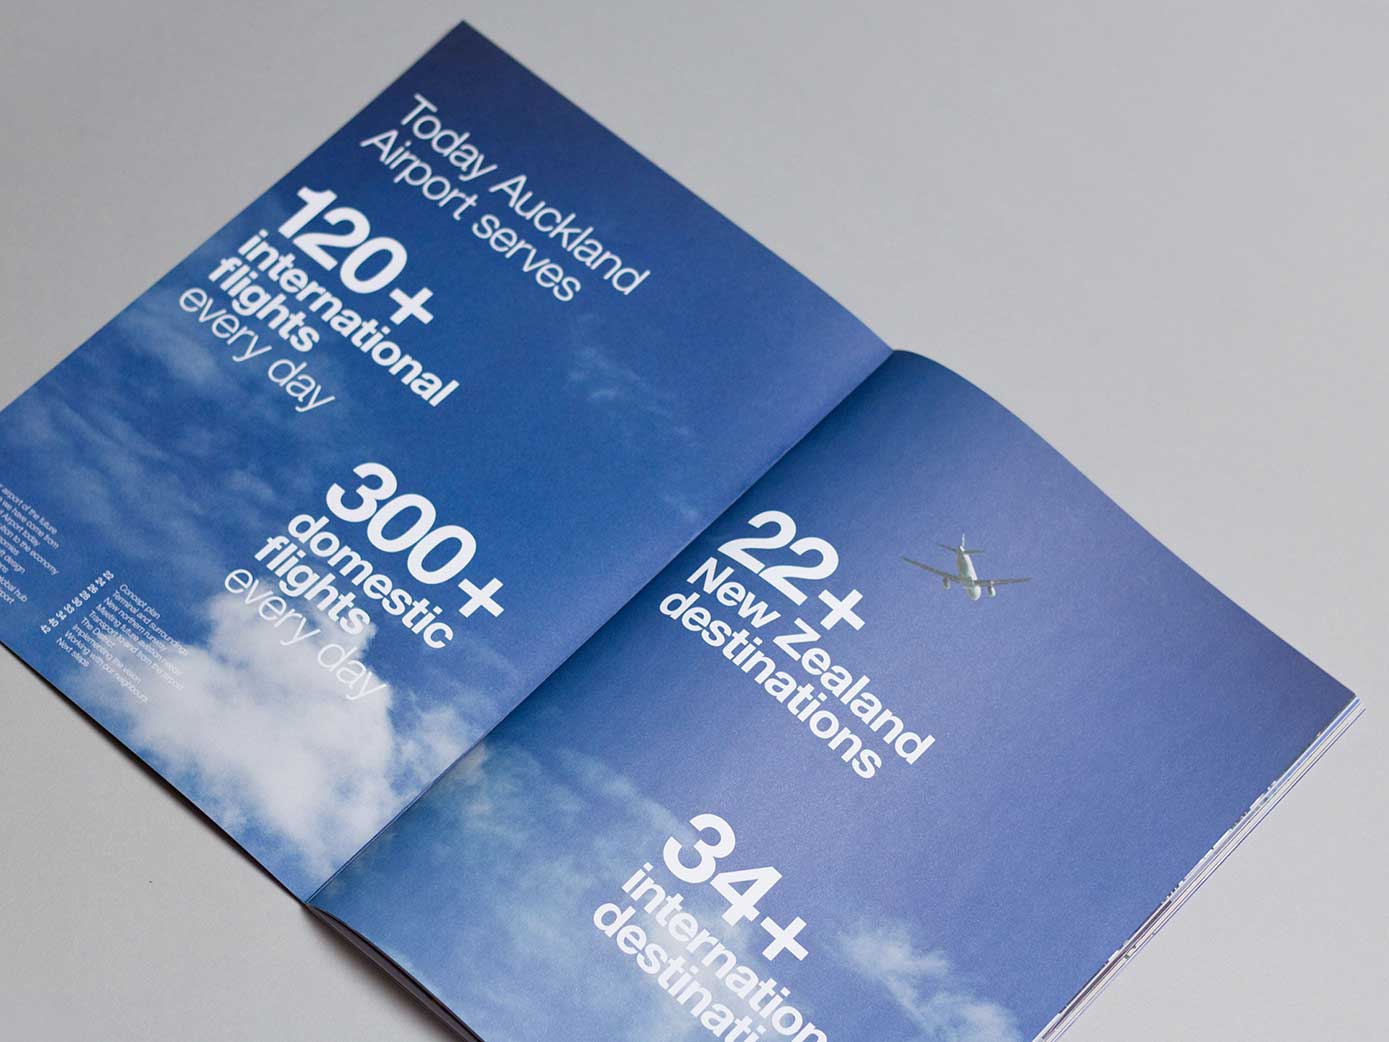 Double page spread showcasing some Auckland Airport statistics